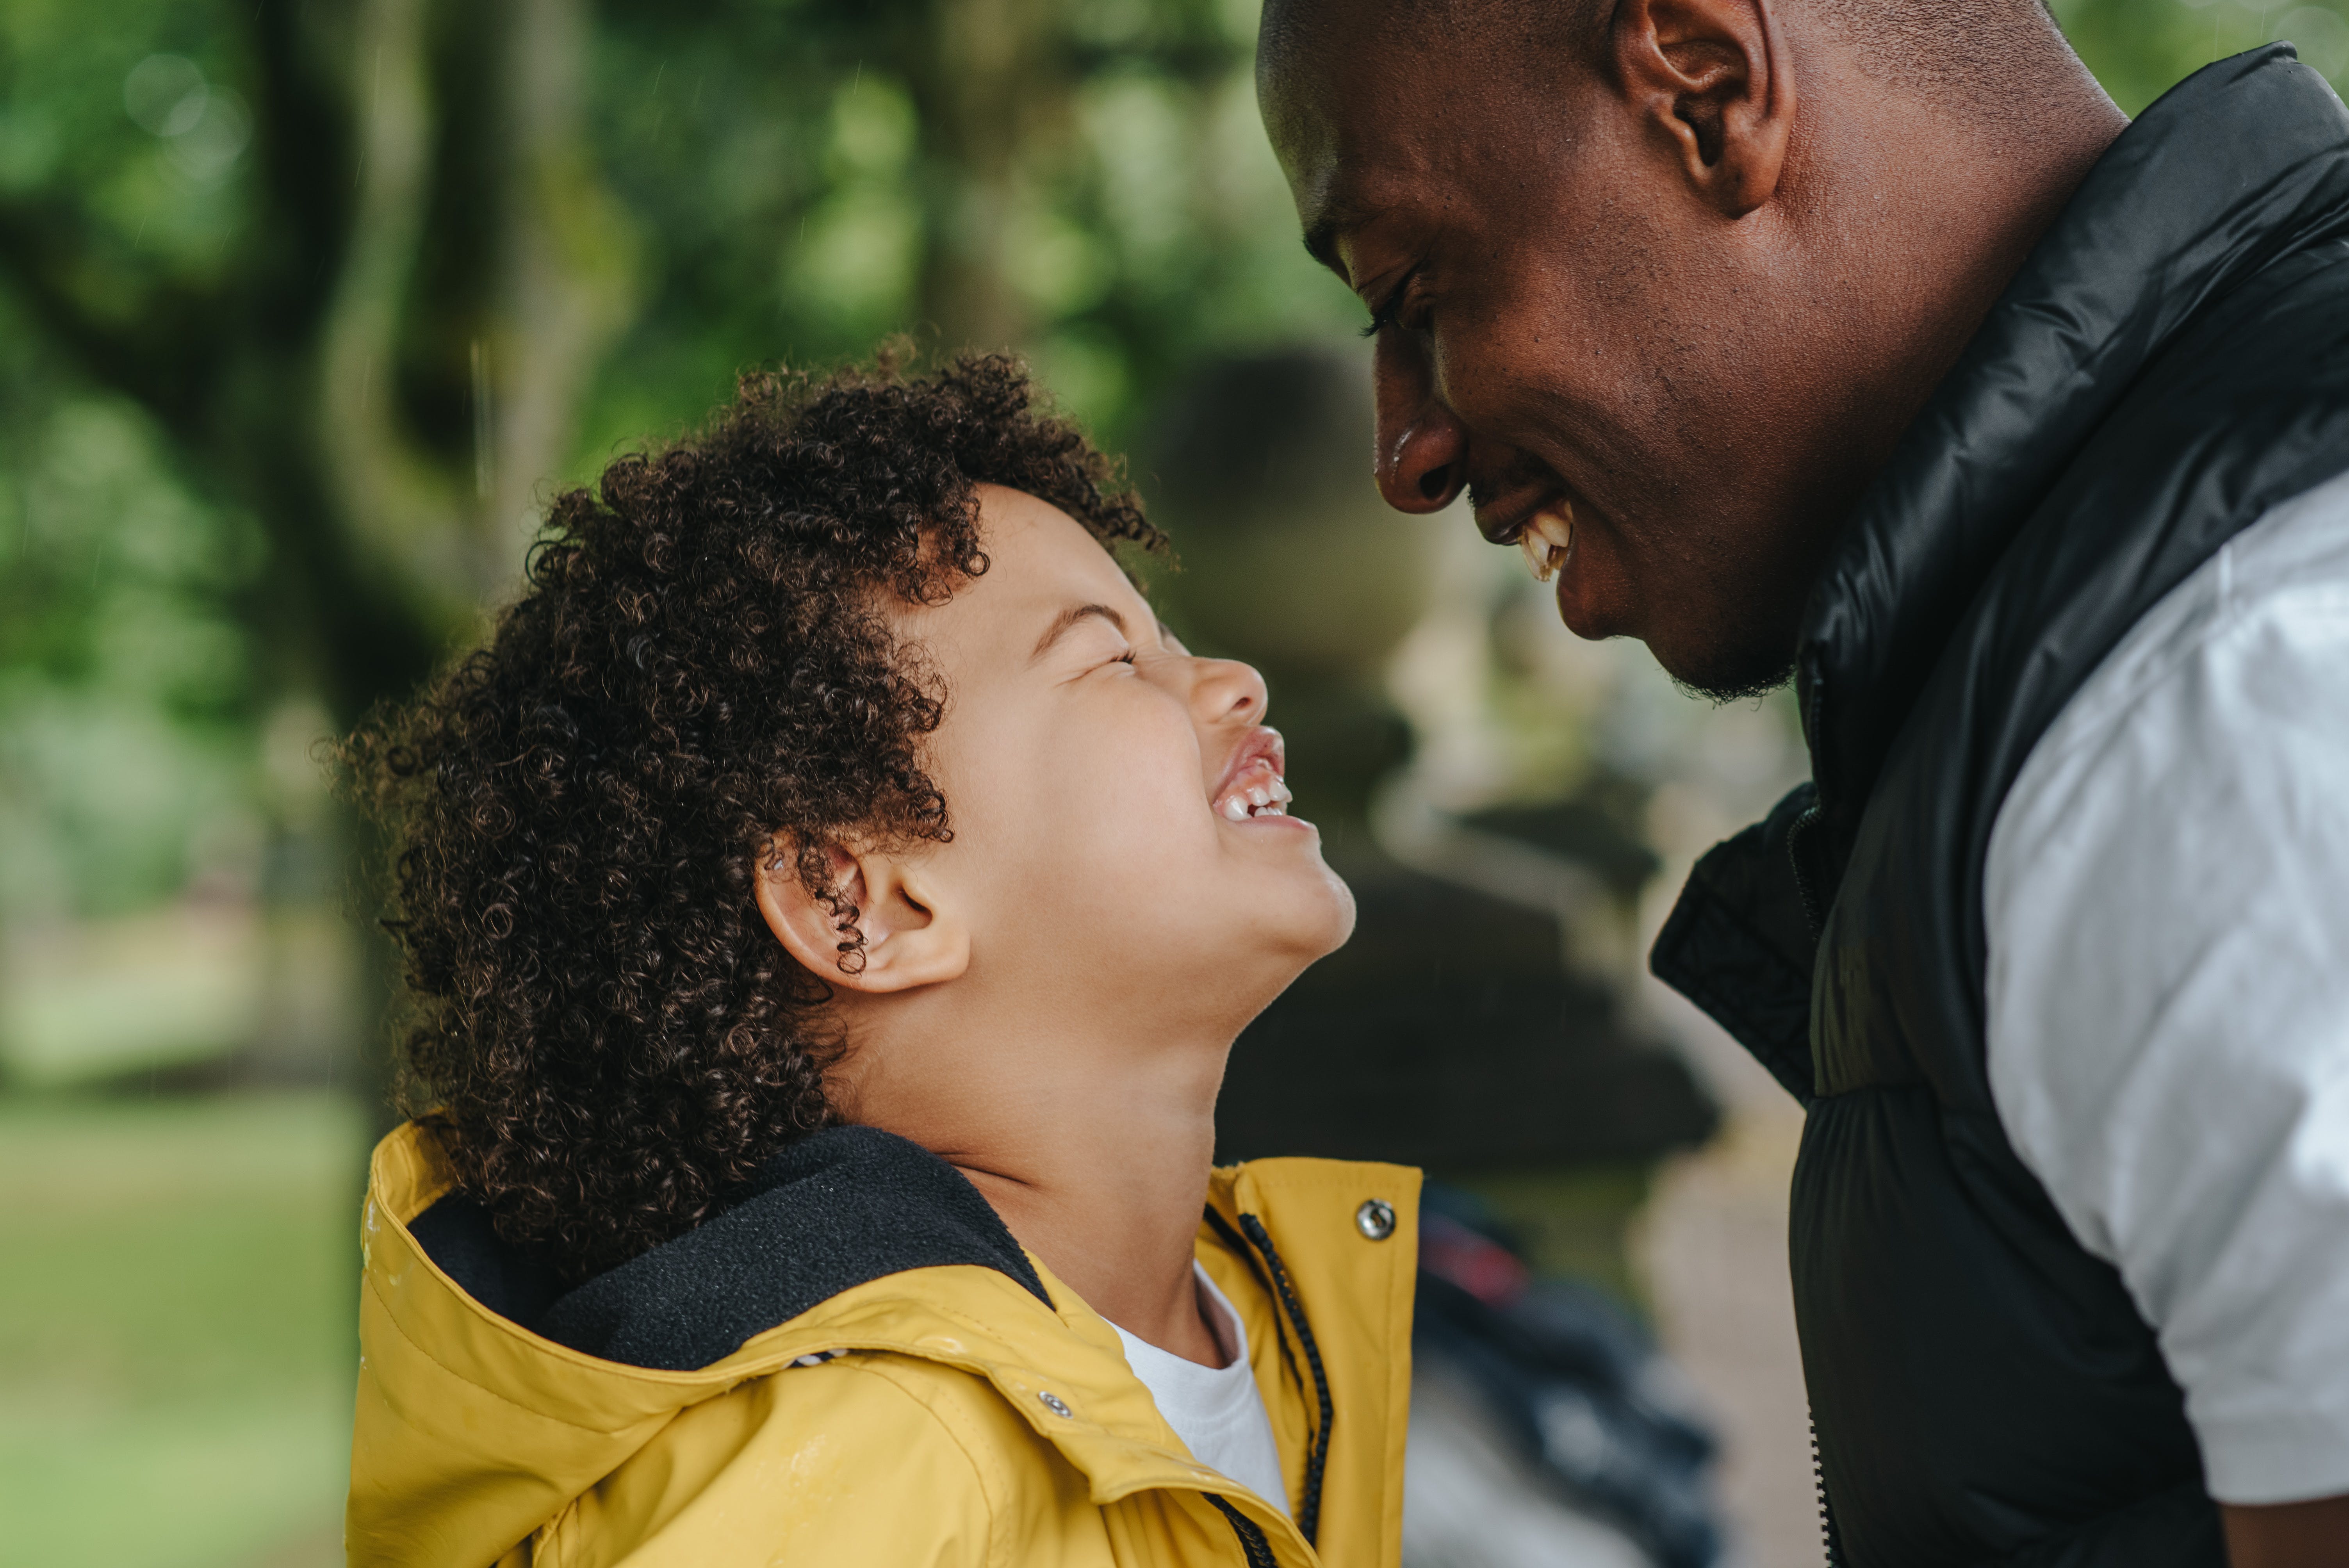 A man and a young boy laughing | Source: Pexels